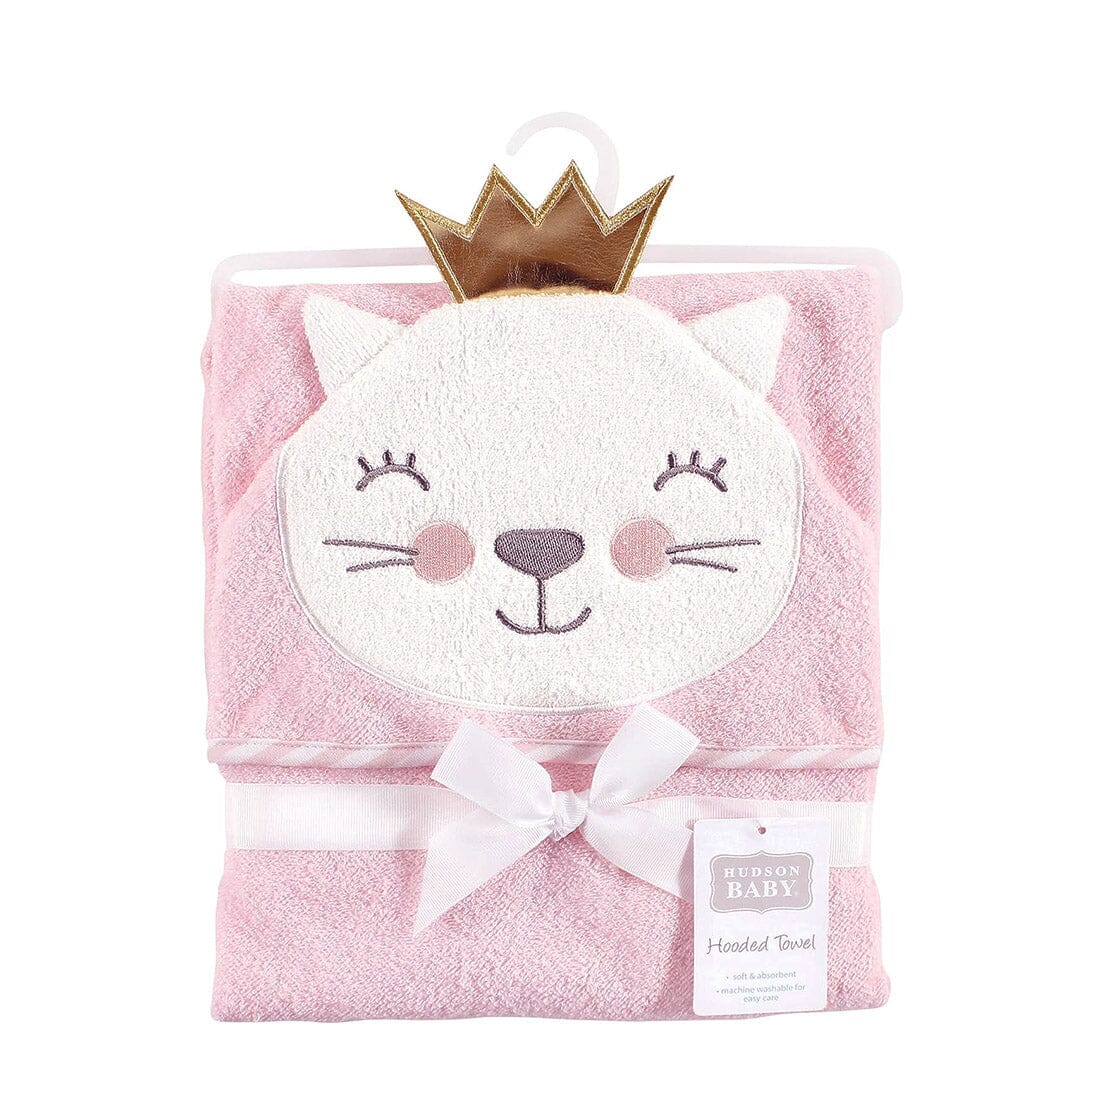 Little Baby Girl Animal Face Hooded Towel Towels Iluvlittlepeople 0-24 Months Pink Cotton